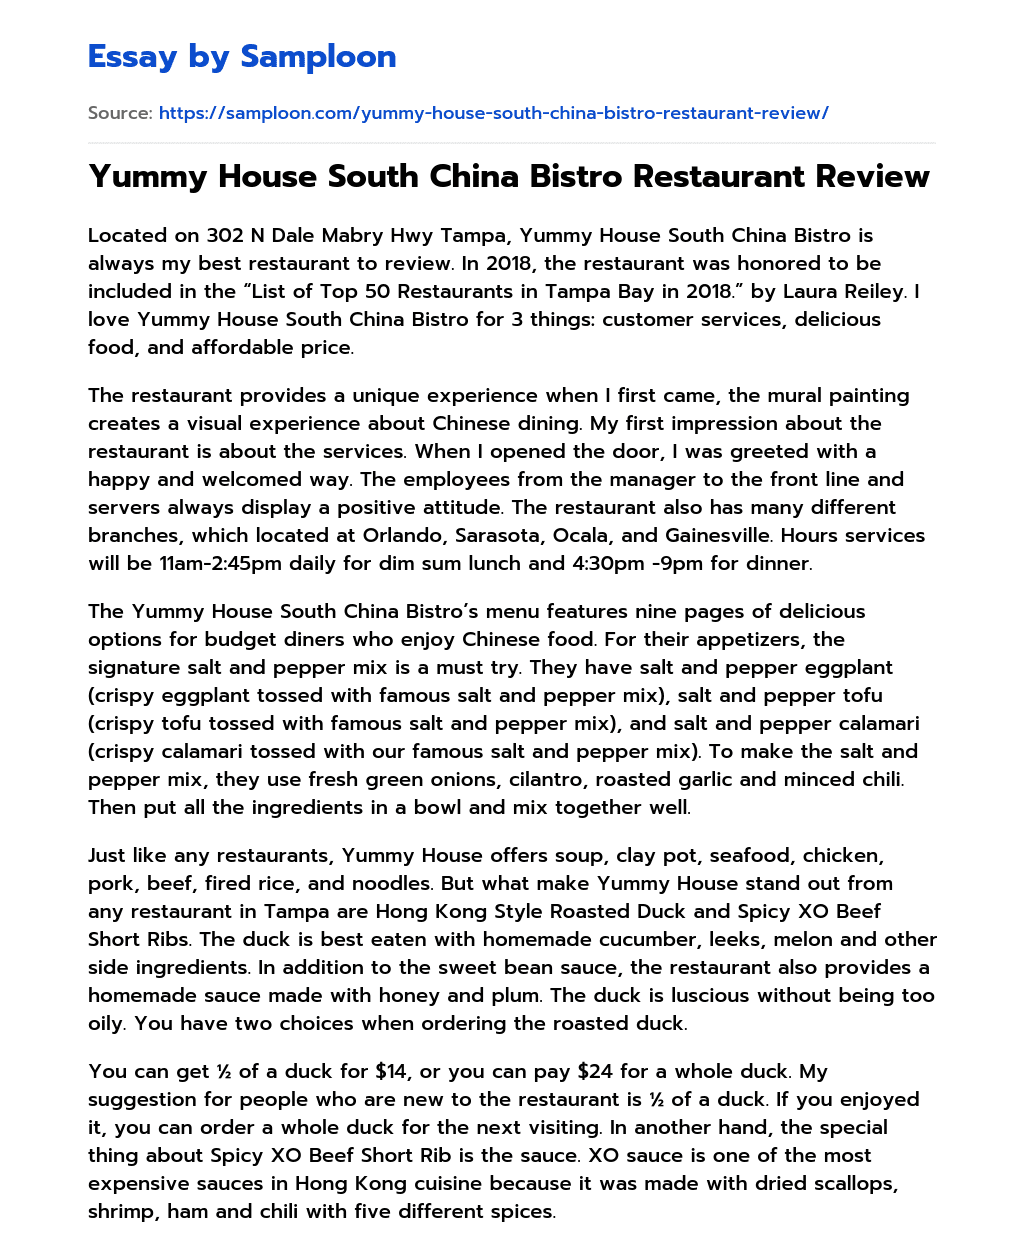 Yummy House South China Bistro Restaurant Review essay